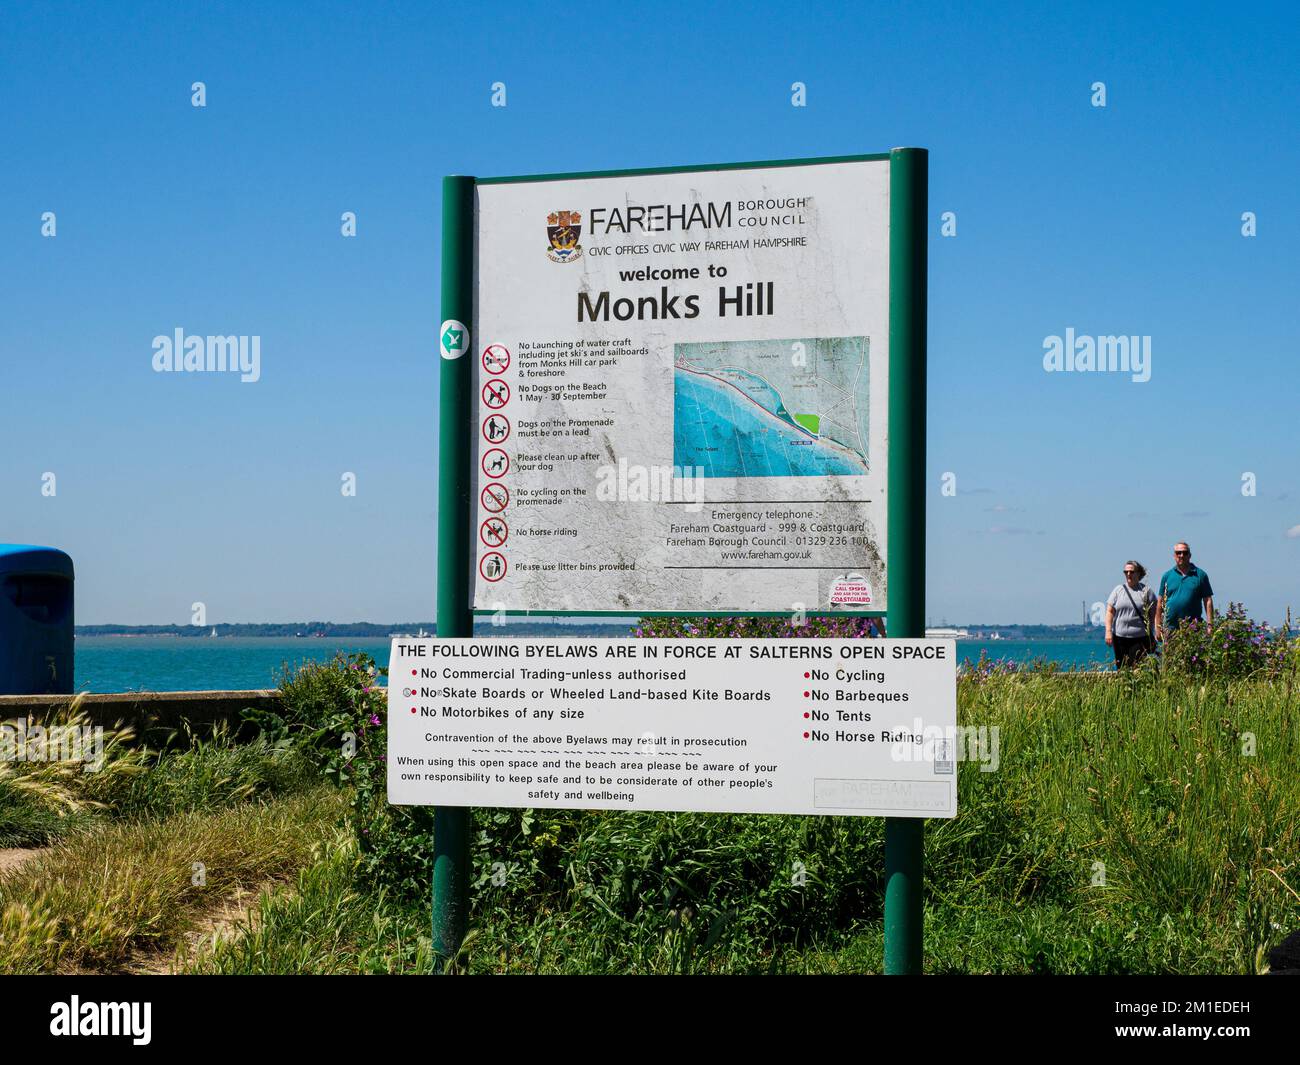 Council sign displaying rules and byelaws at Monks Hill beach, Lee-on-the-Solent, Hampshire, UK Stock Photo